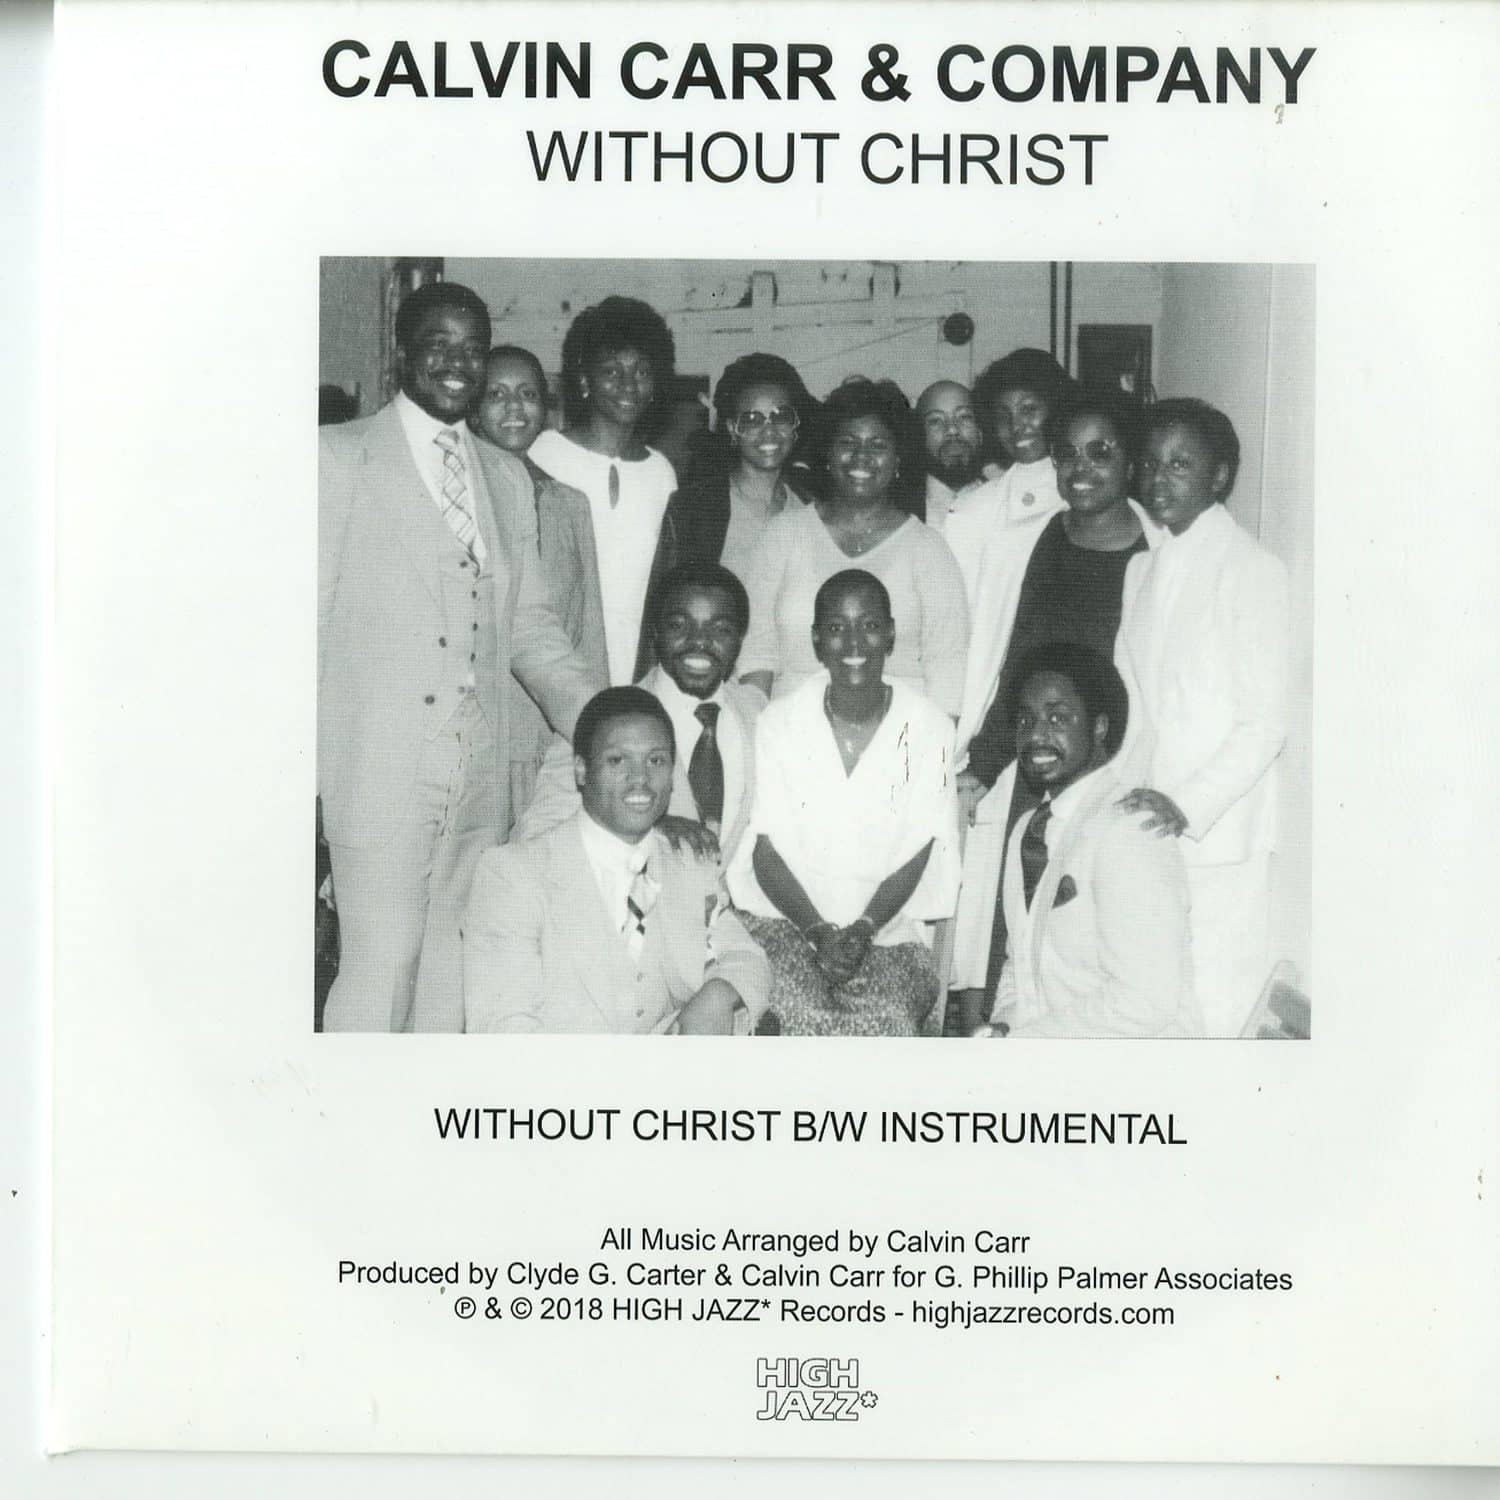 Calvin Carr & Company - WITHOUT CHRIST 